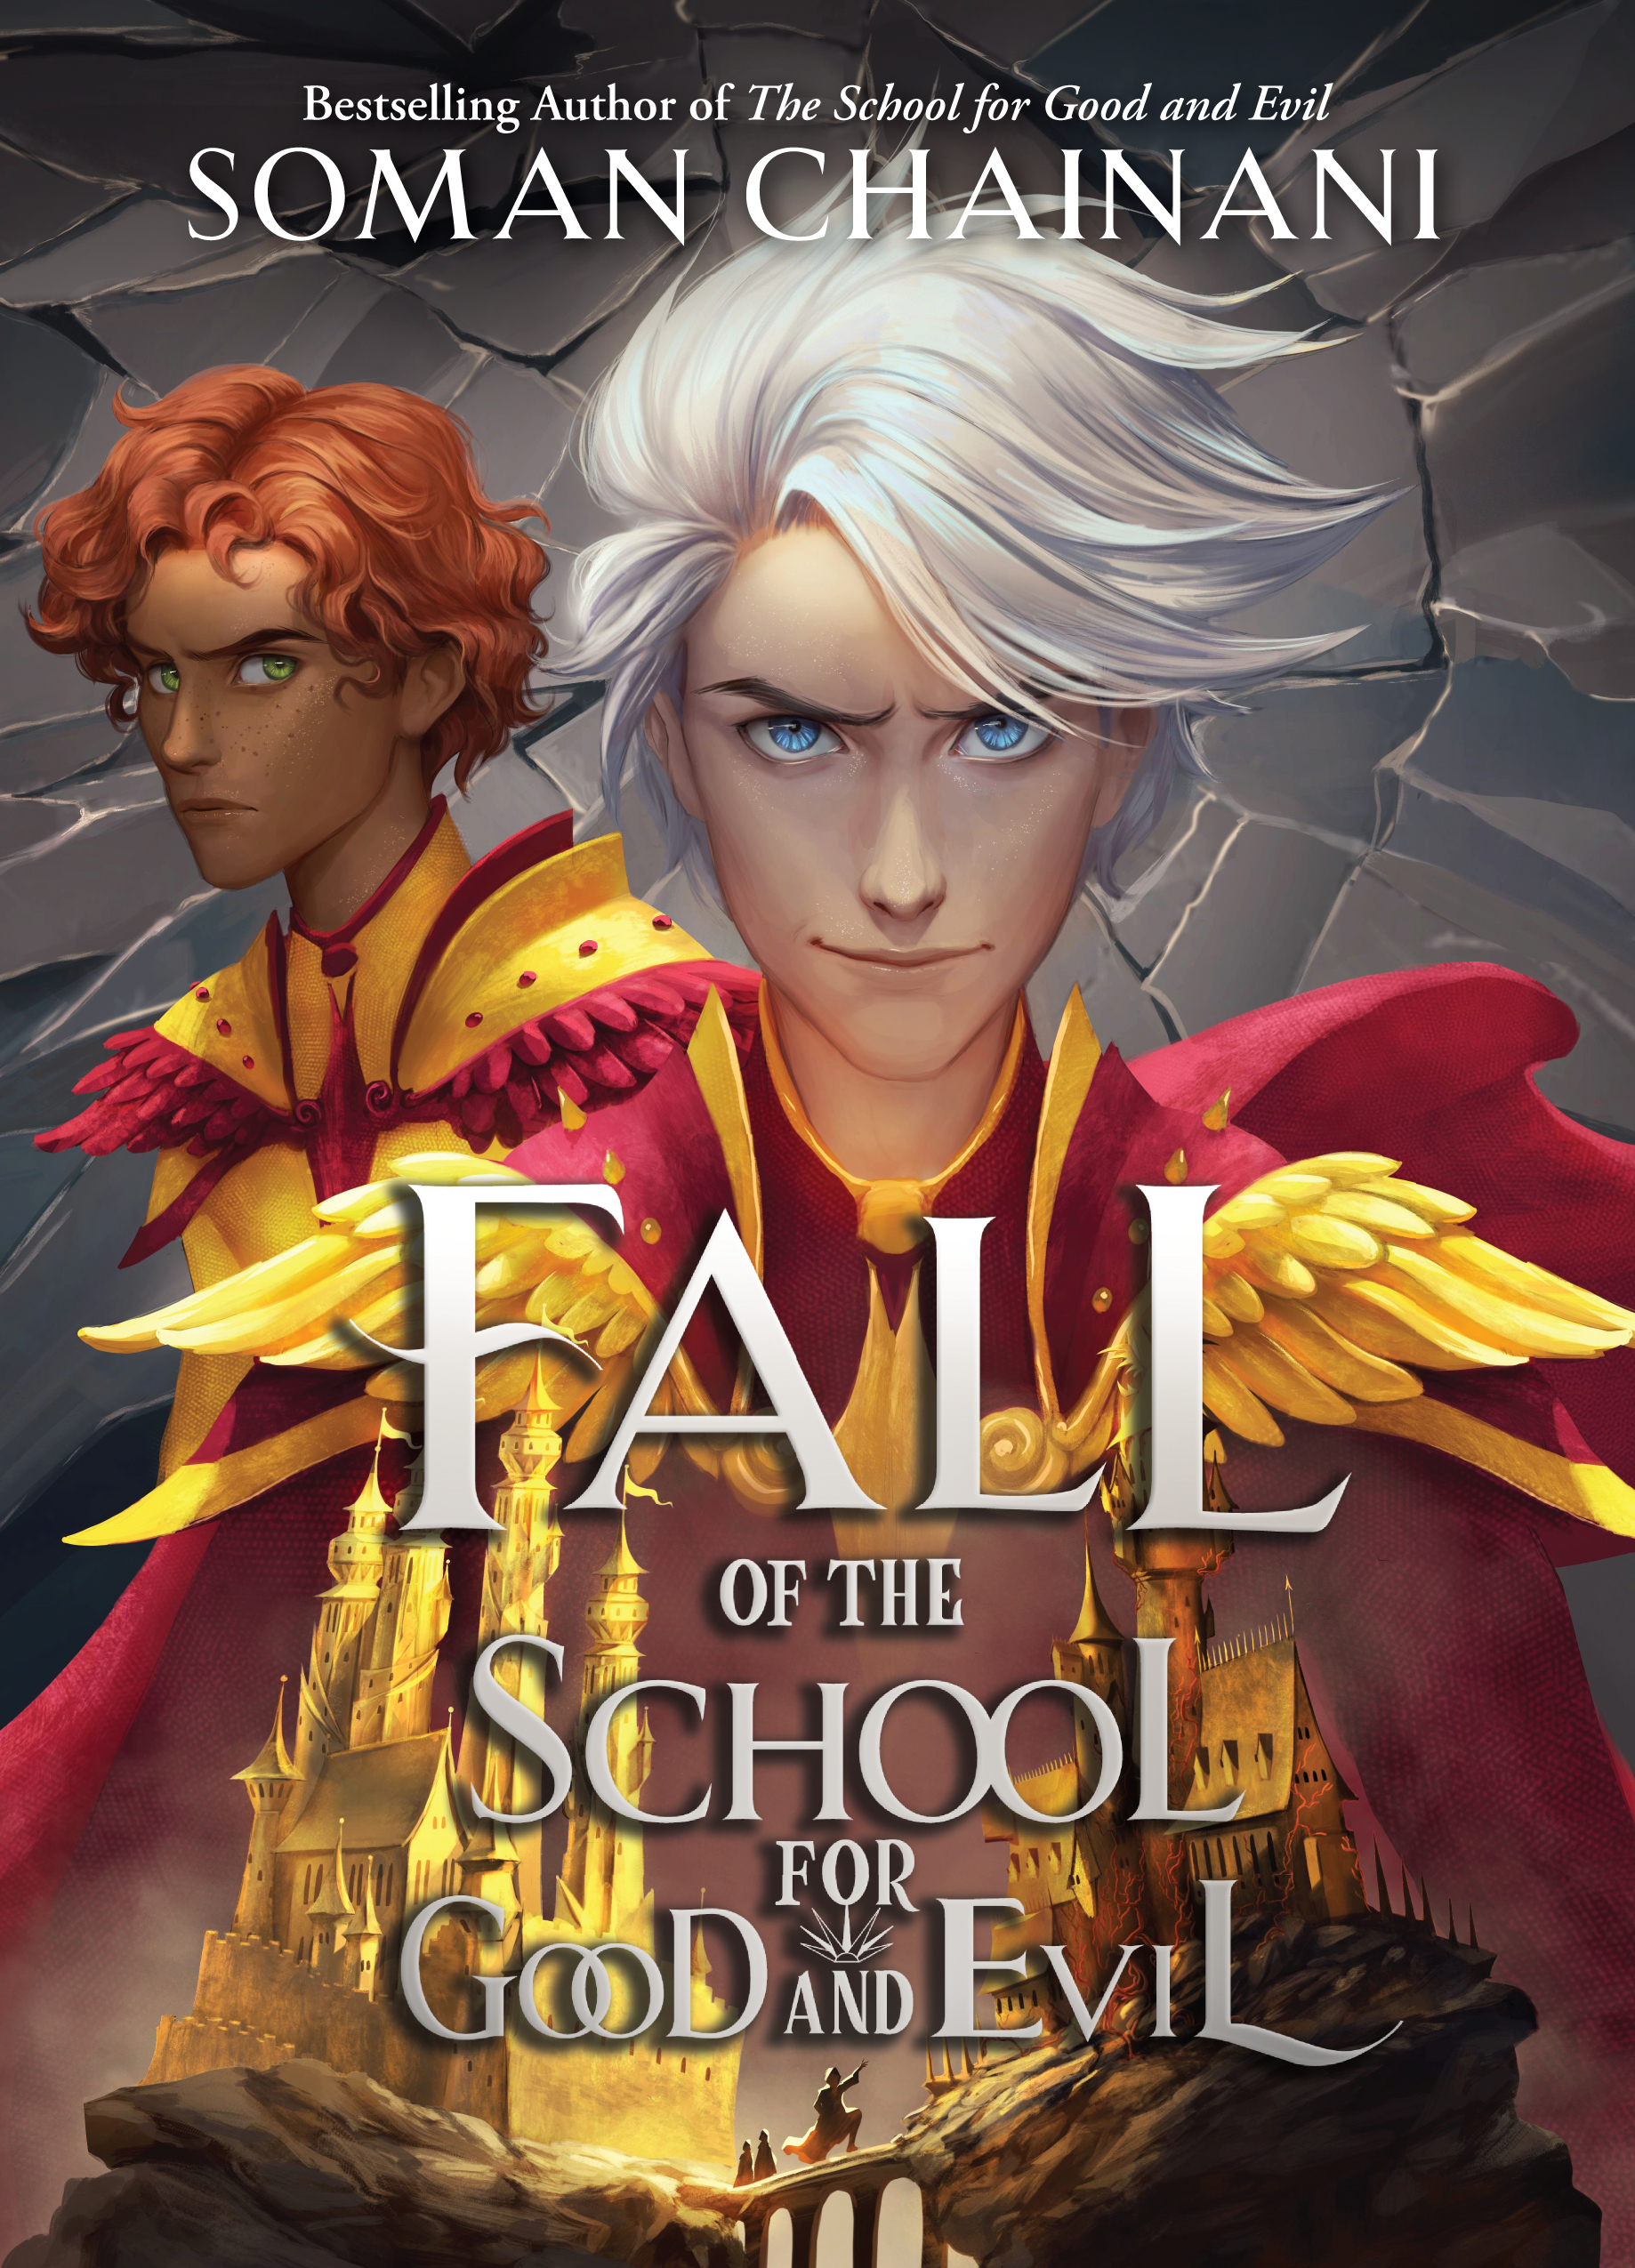 Author Signing with Soman Chainani/Fall of the School For Good and Evil